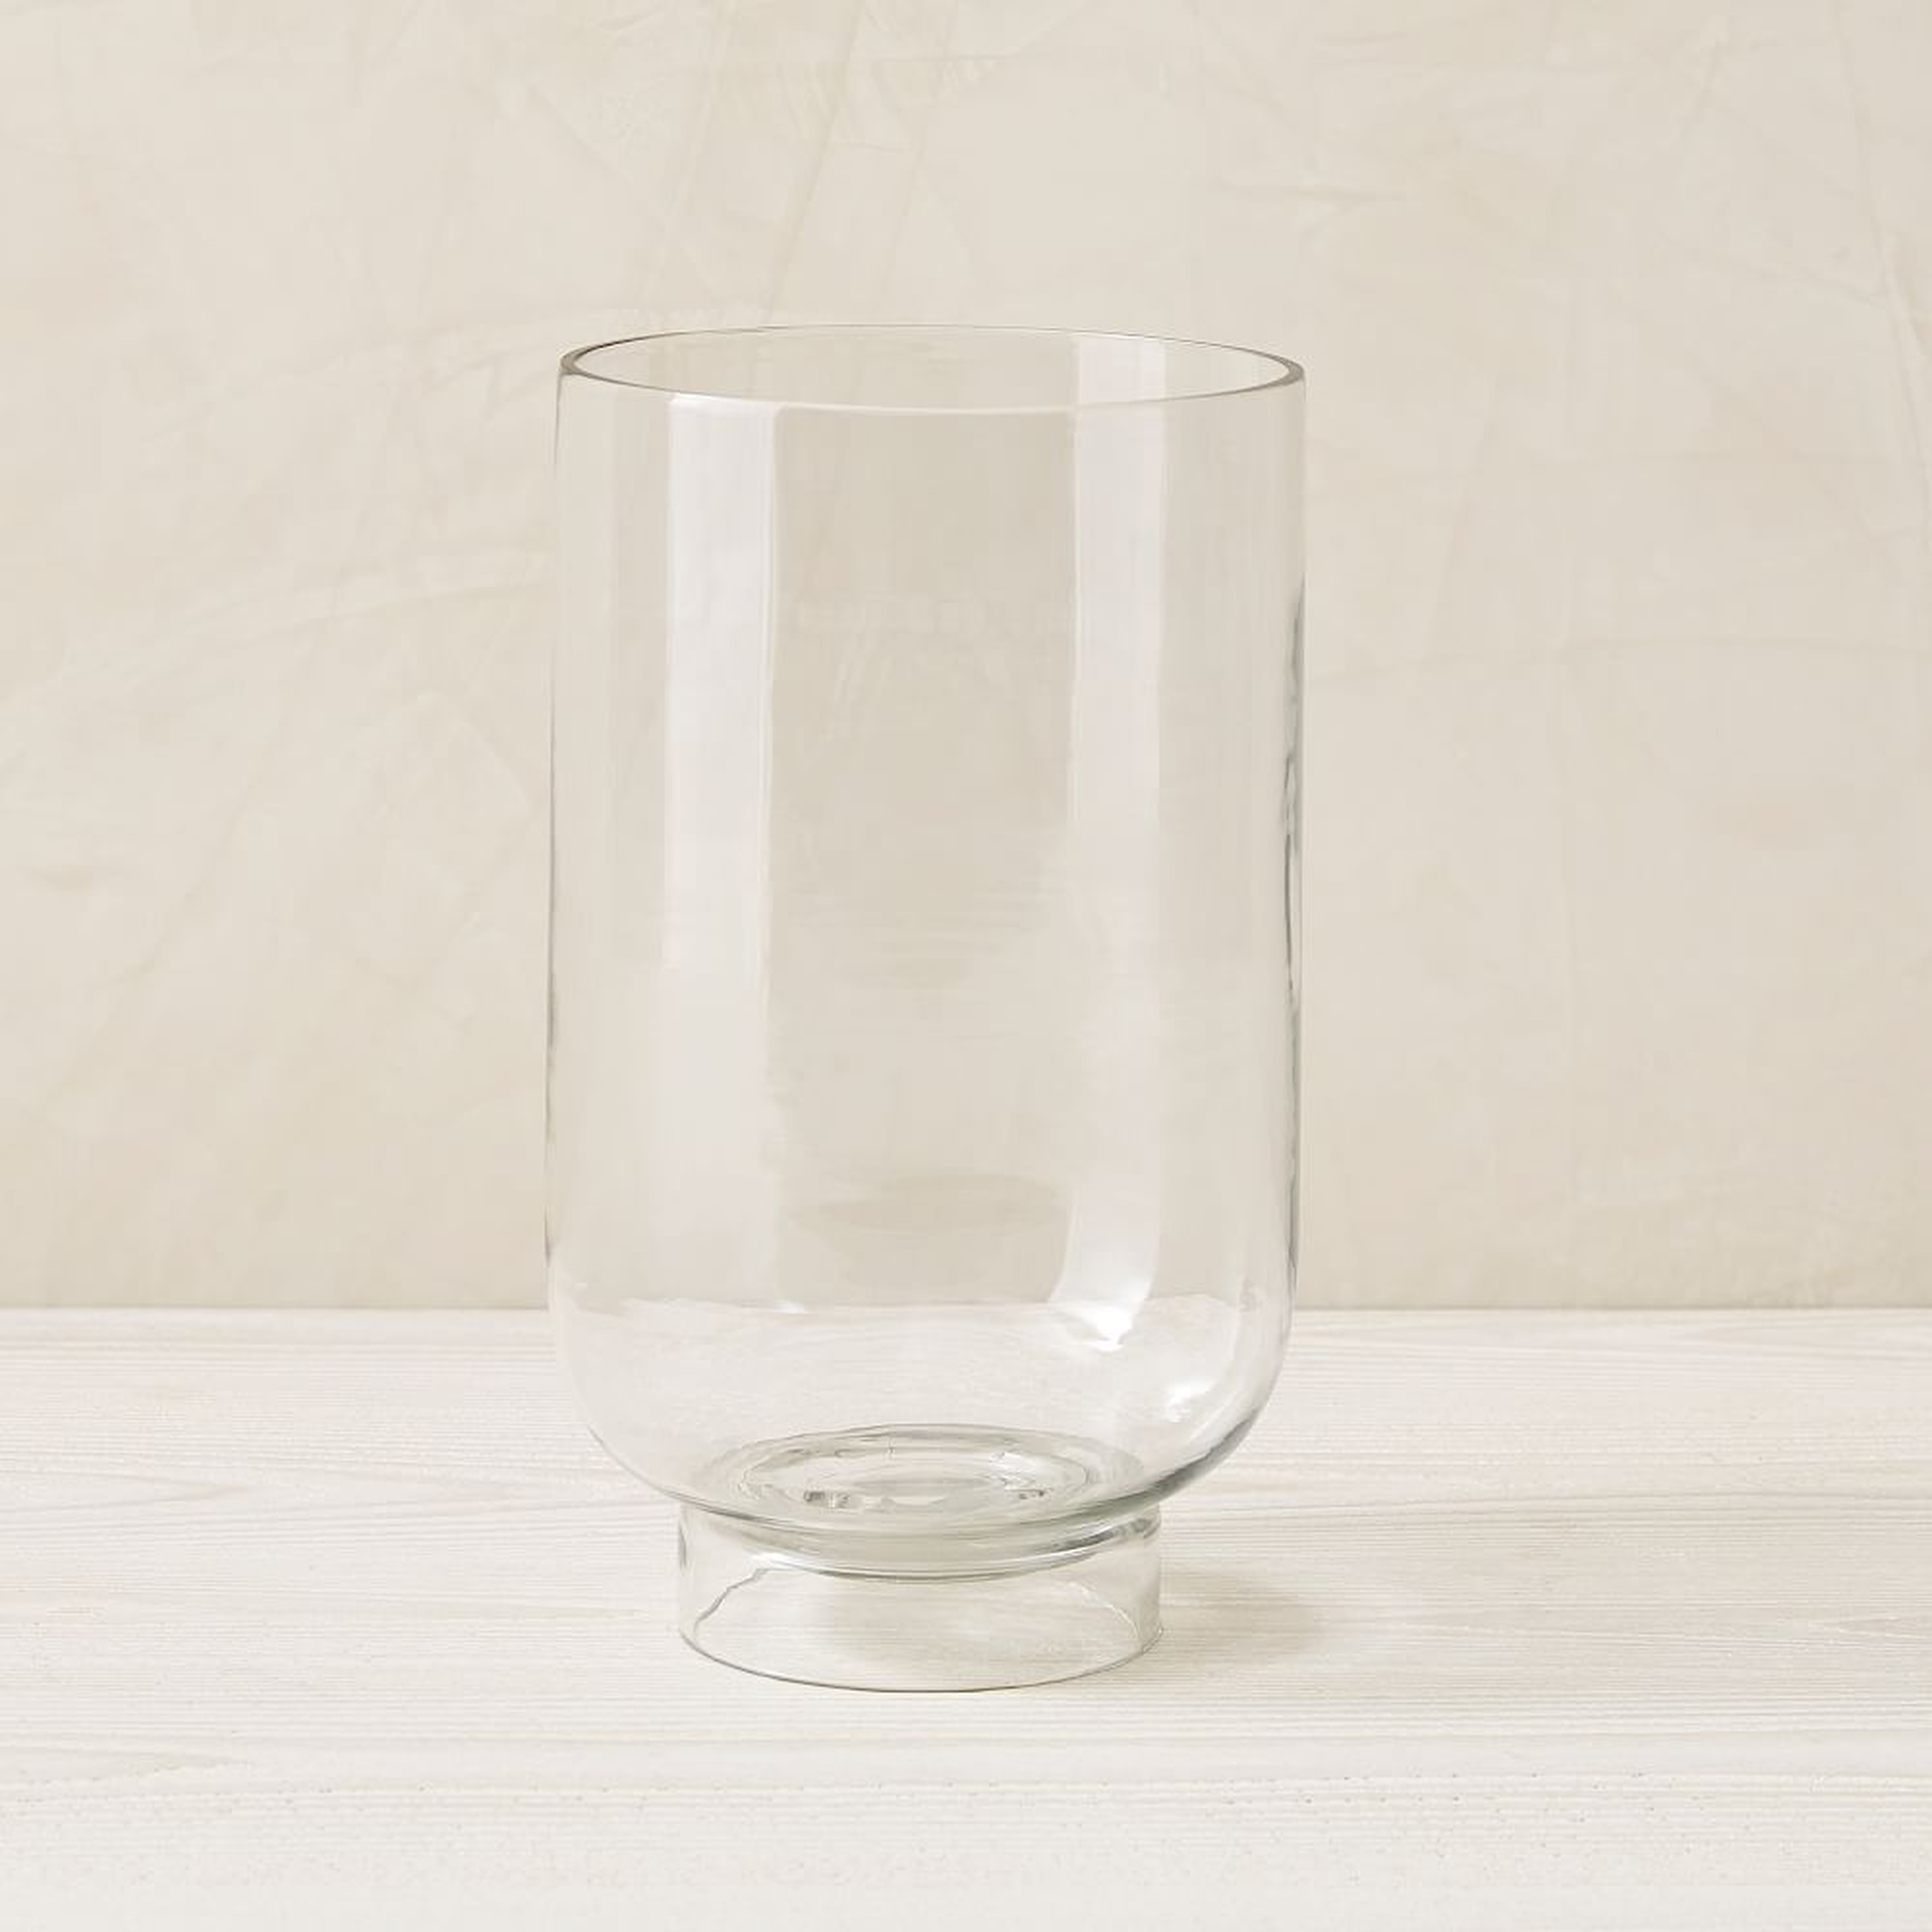 Foundations Glass Large Vase, Clear, Glass, 12" - West Elm